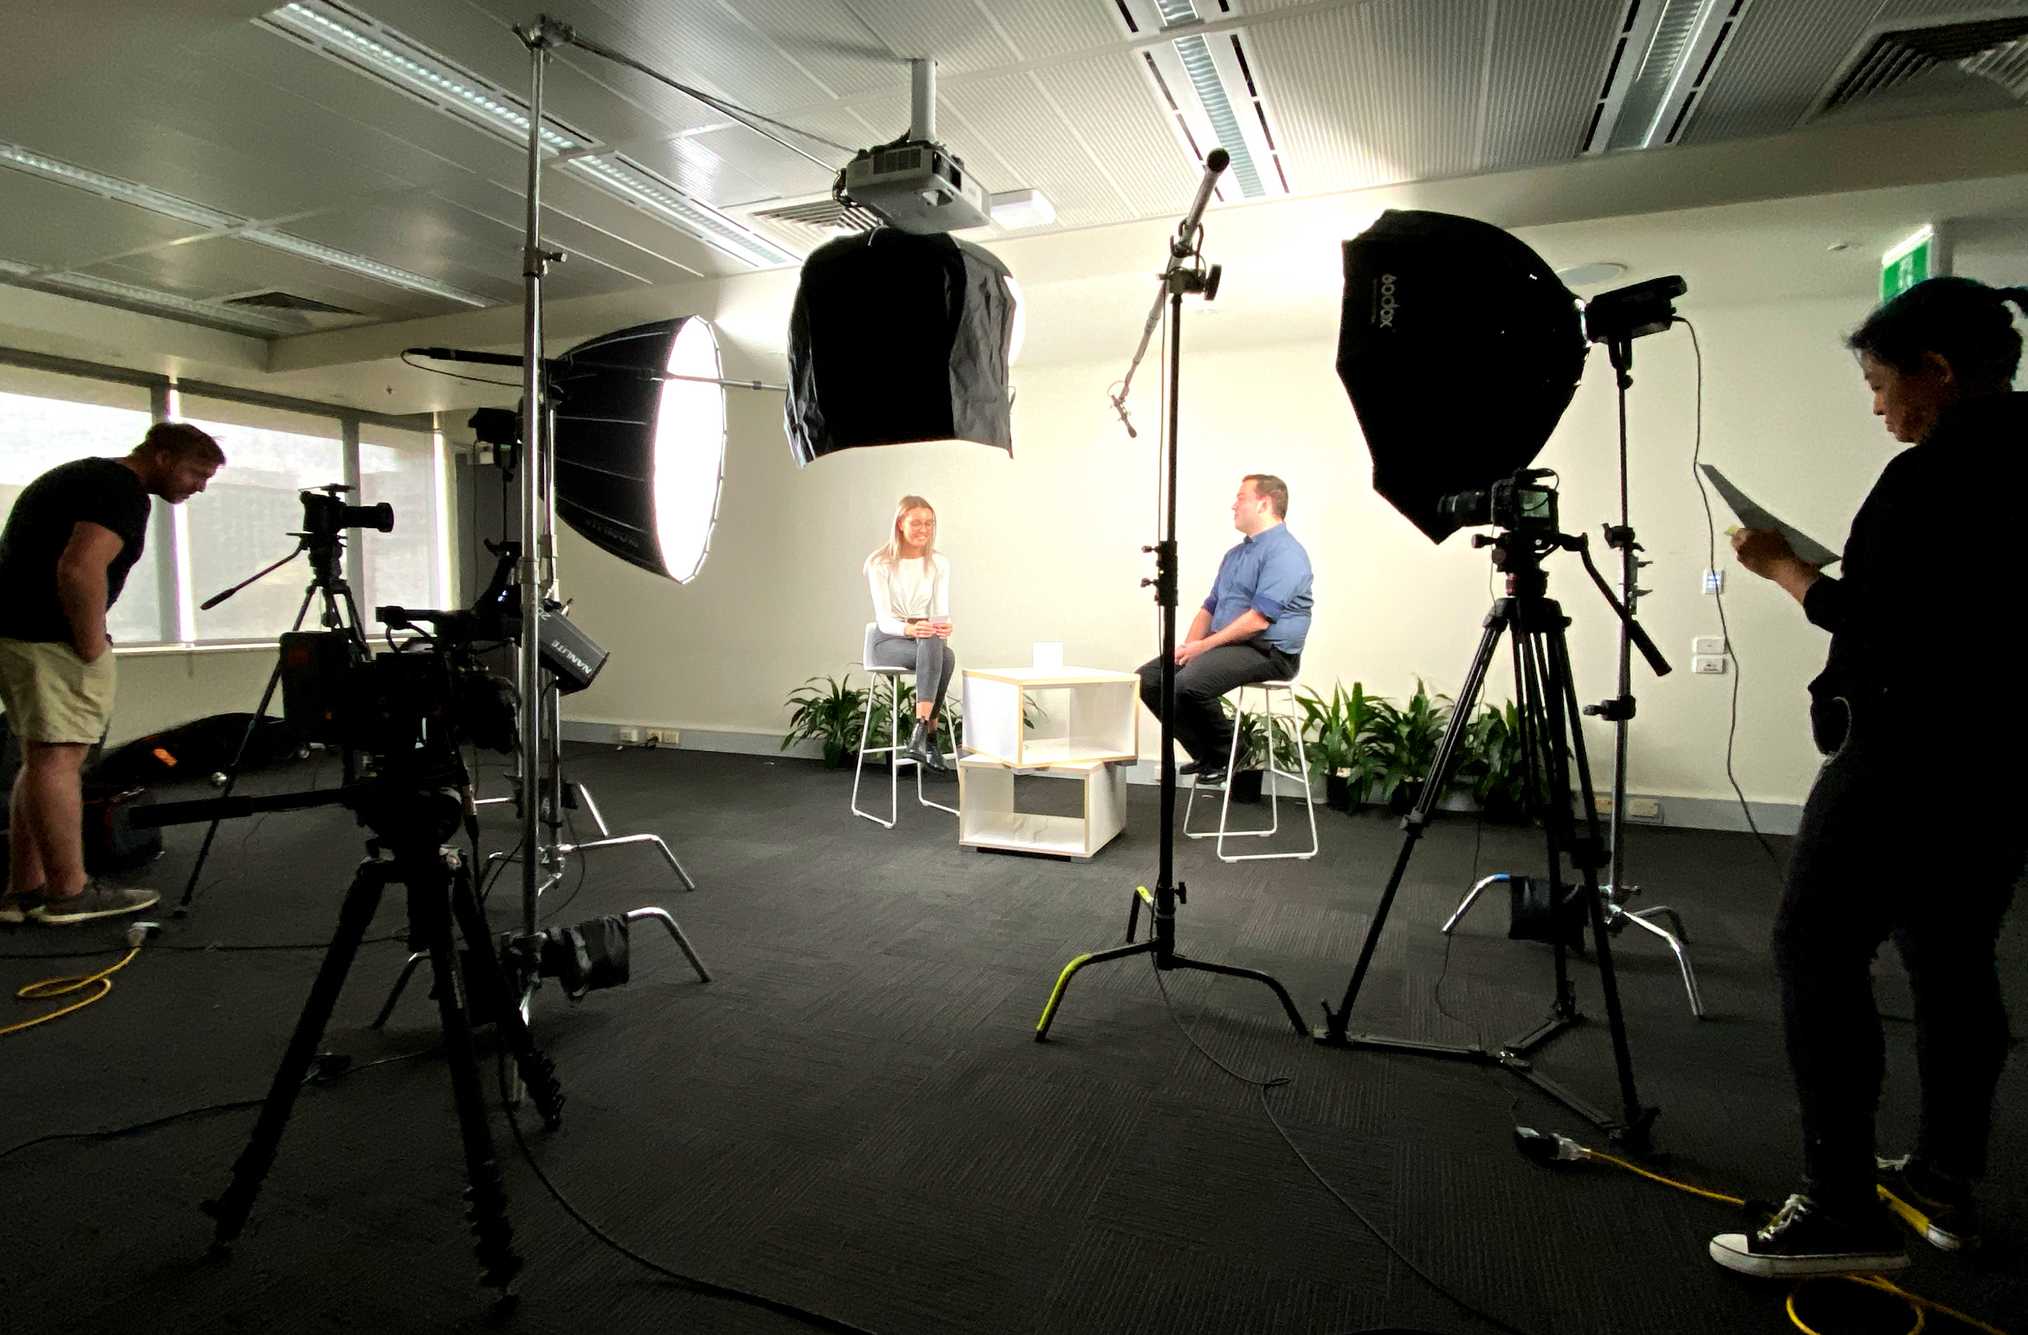 How Videography Can Showcase Your Company's Values